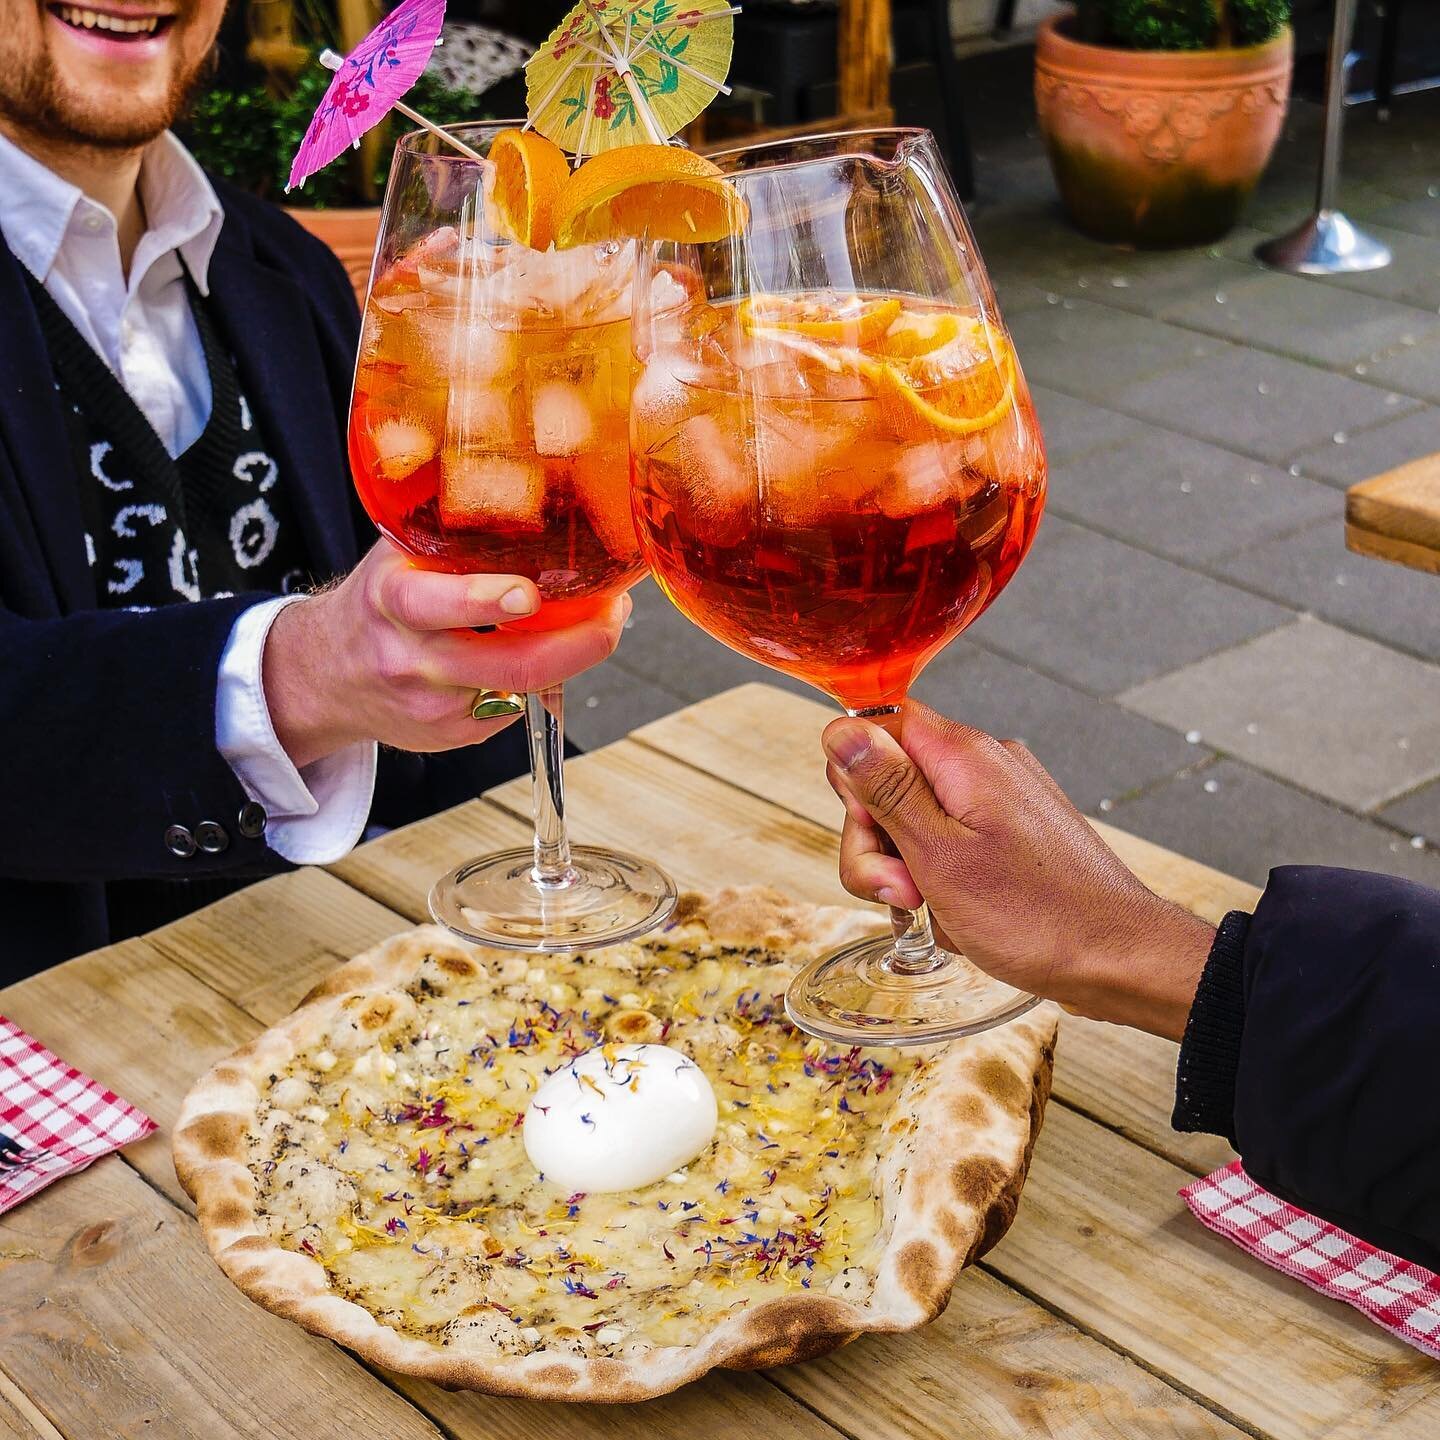 2 LITRES OF APEROL SPRITZ? Yes you heard right - our brunch bonanza offers 2L of Aperol Spritz per person and a pizza to share! 
.
.
.
.
.
.
#eeeeeats #timeoutlondon #londonfood #londonfoodie #londonfoodies #londonfoodguide #bottomlessbrunch #aperols